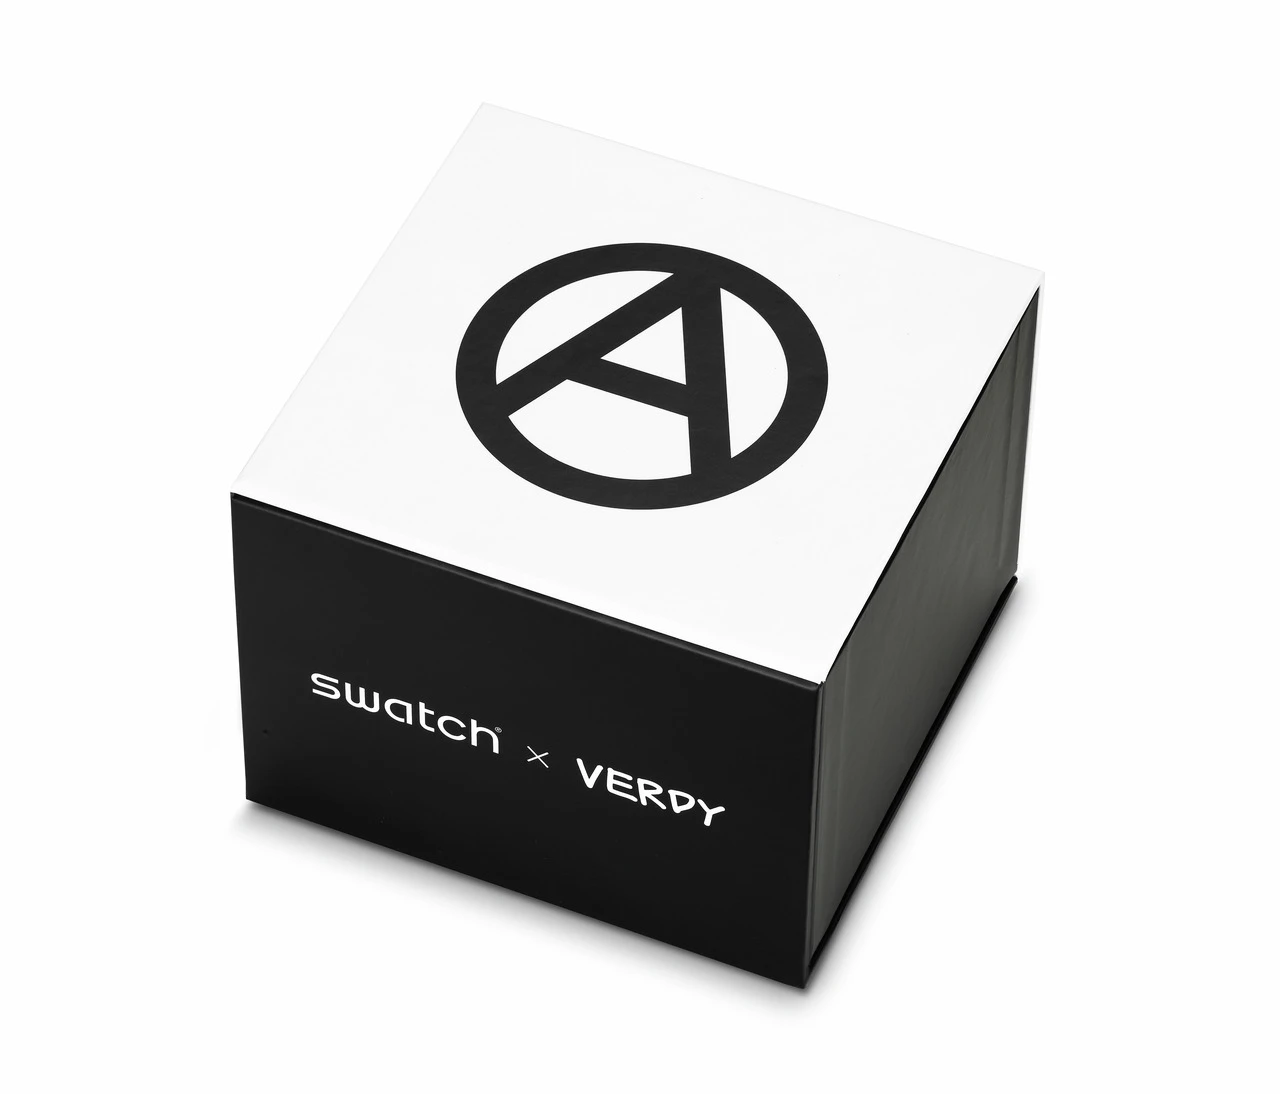 A swatch x verdy collaboration watch box, featuring a sleek black and white design with the verdy peace symbol on top and the collaboration logo on the side.